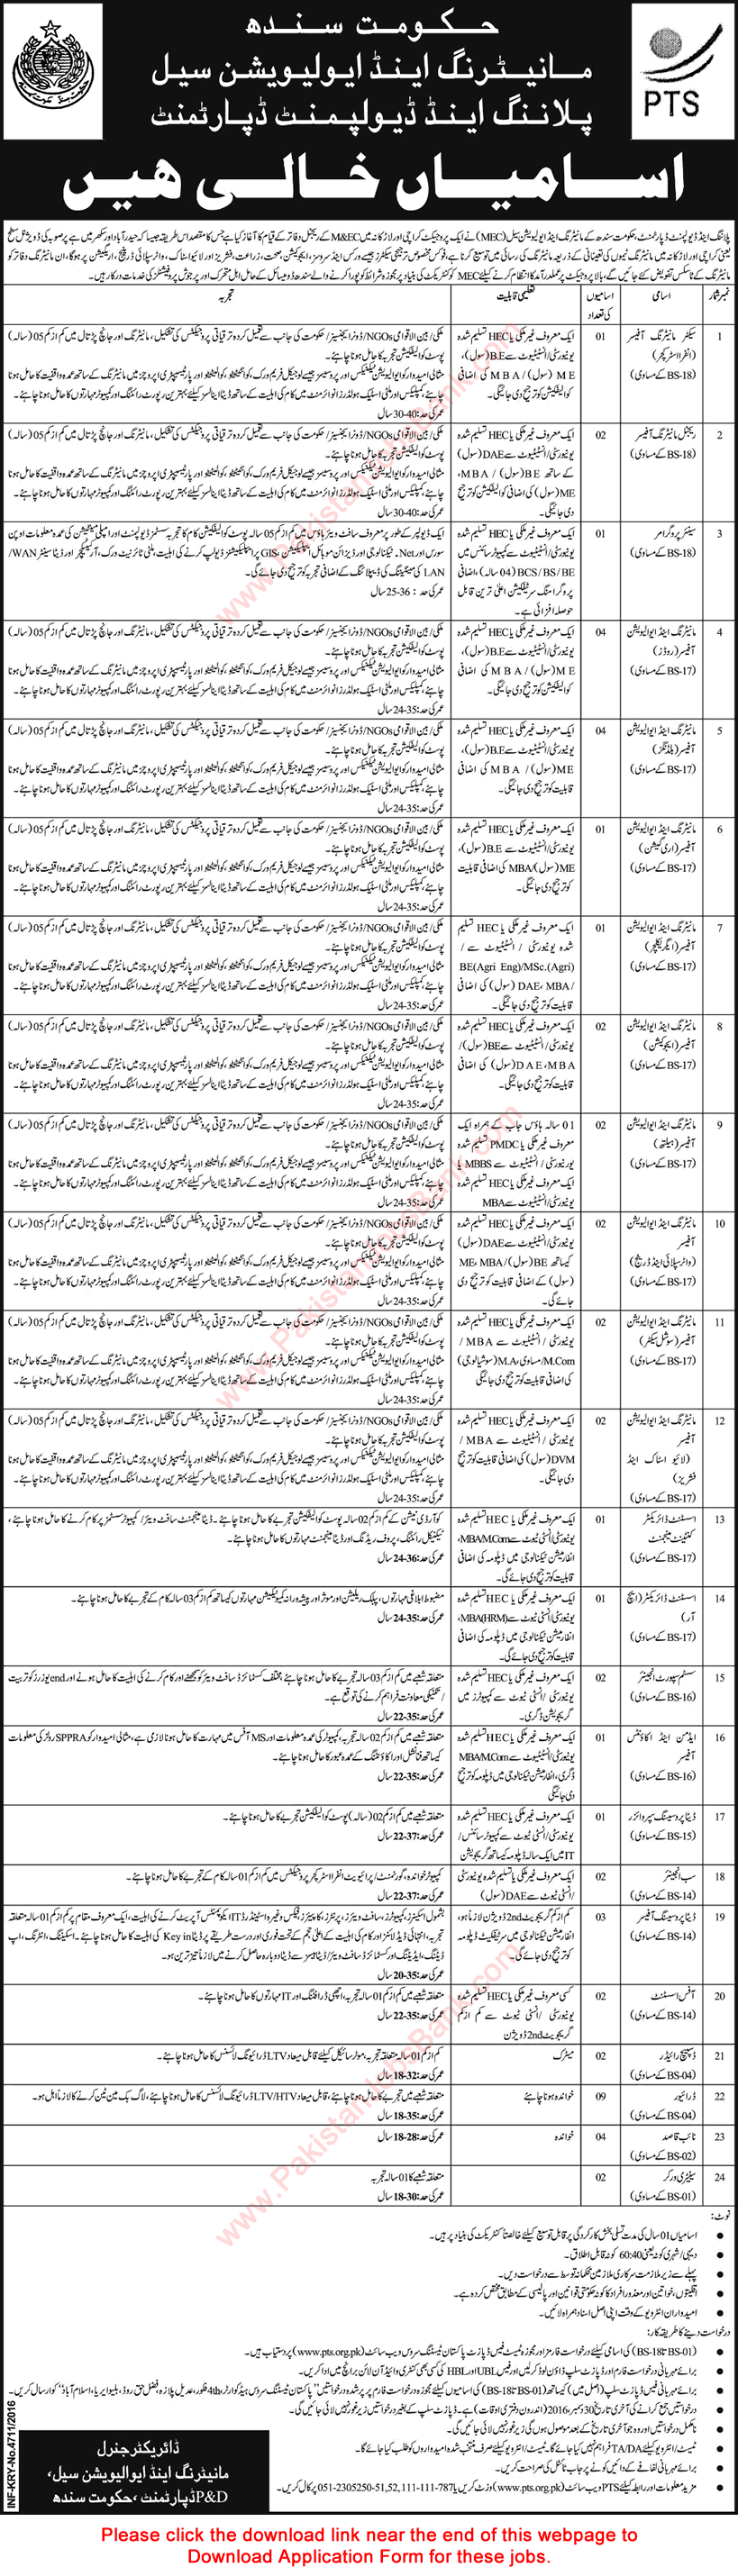 Planning and Development Department Sindh Jobs December 2016 PTS Application Form Download Latest